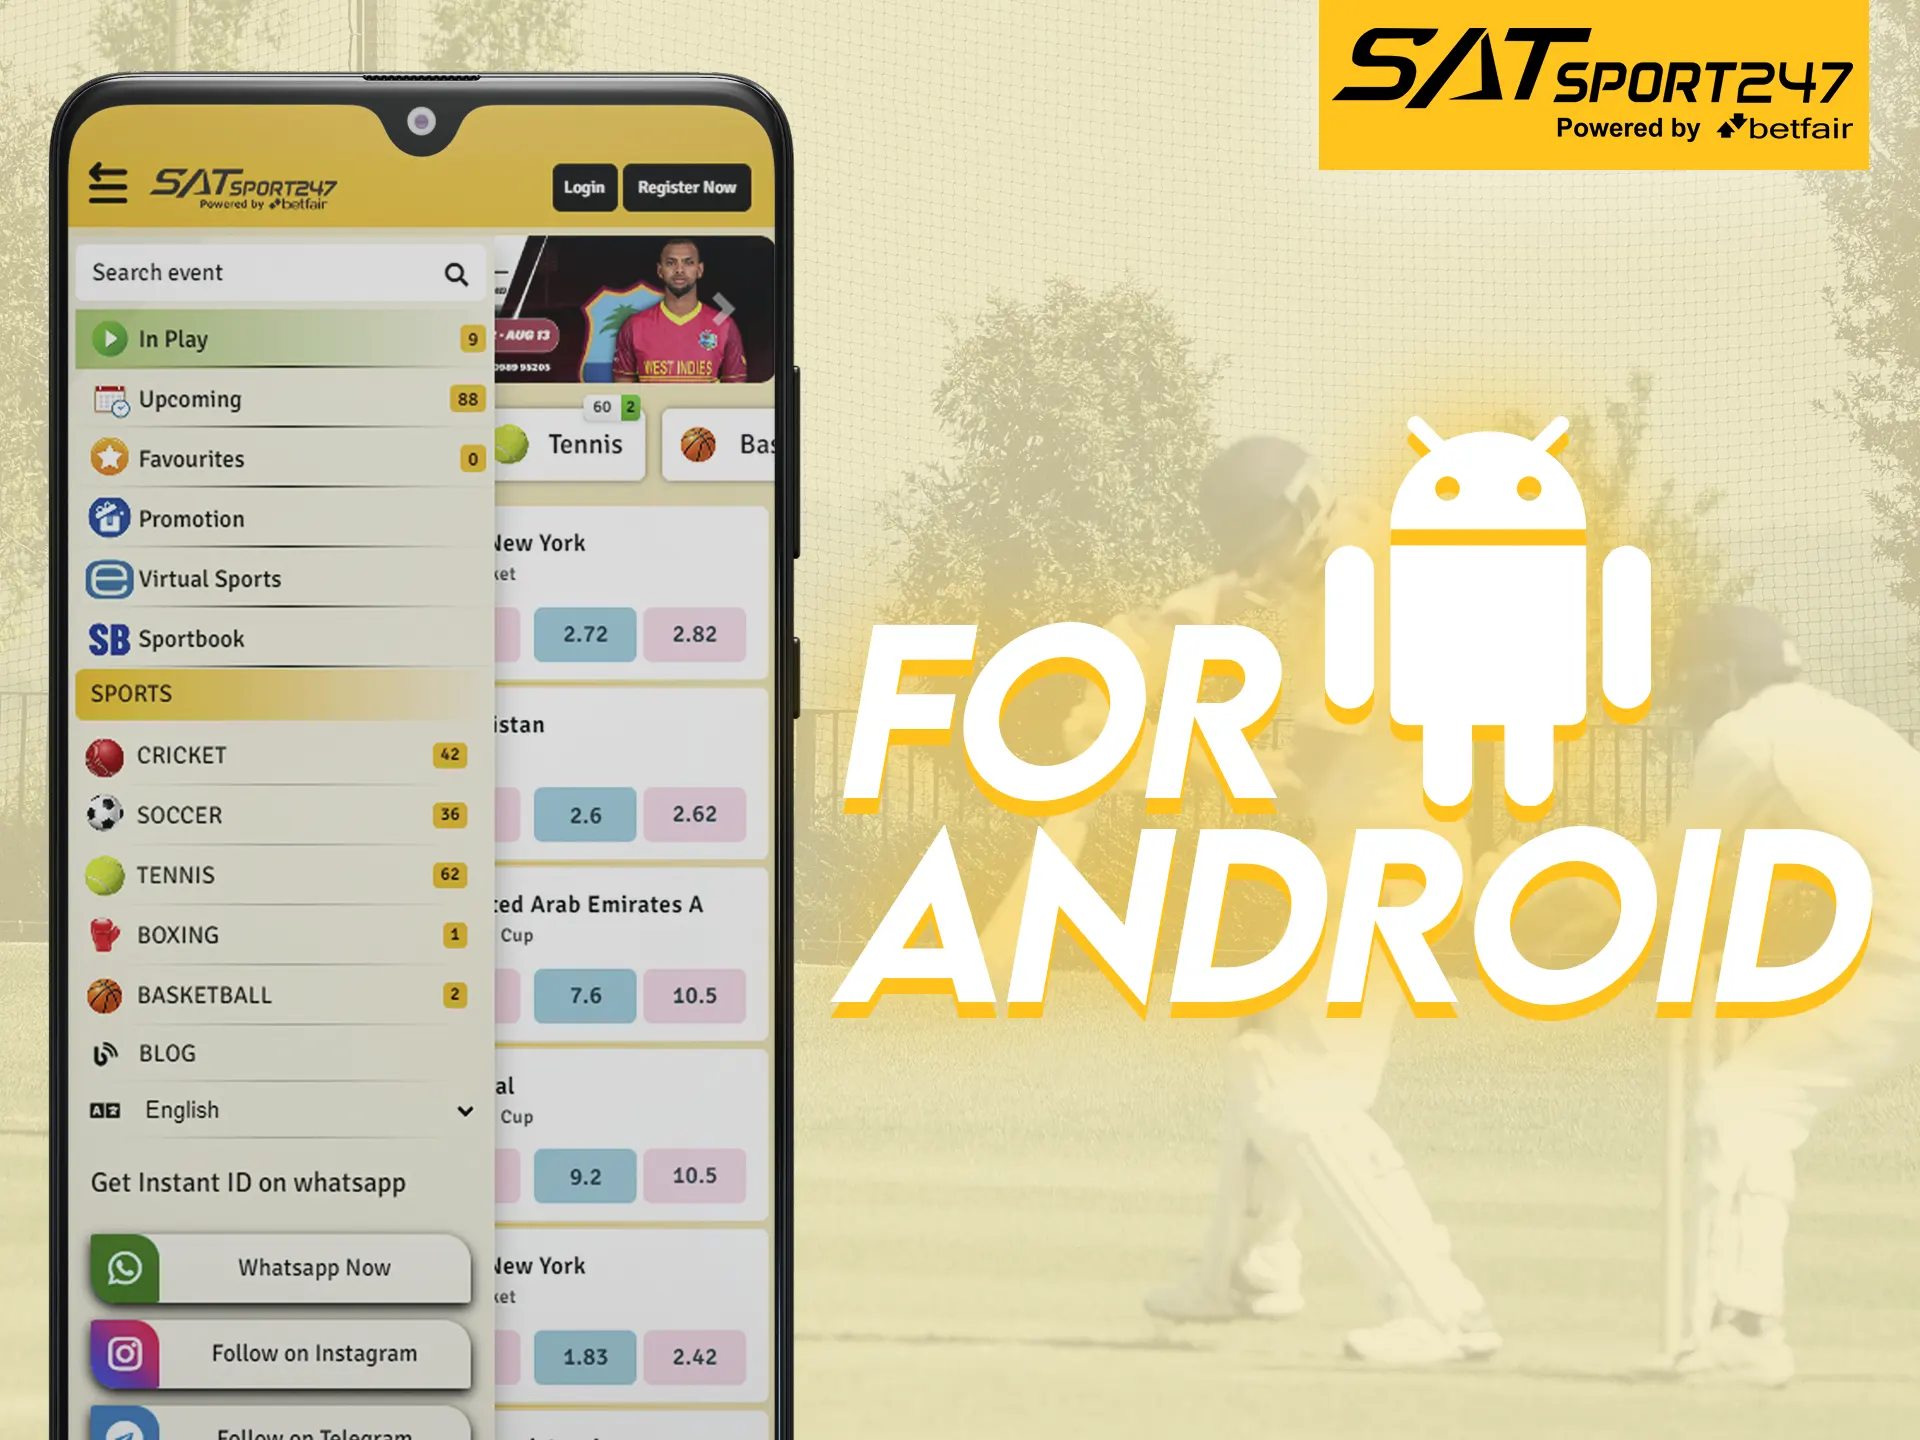 Use Satsport247 on your Android phone.